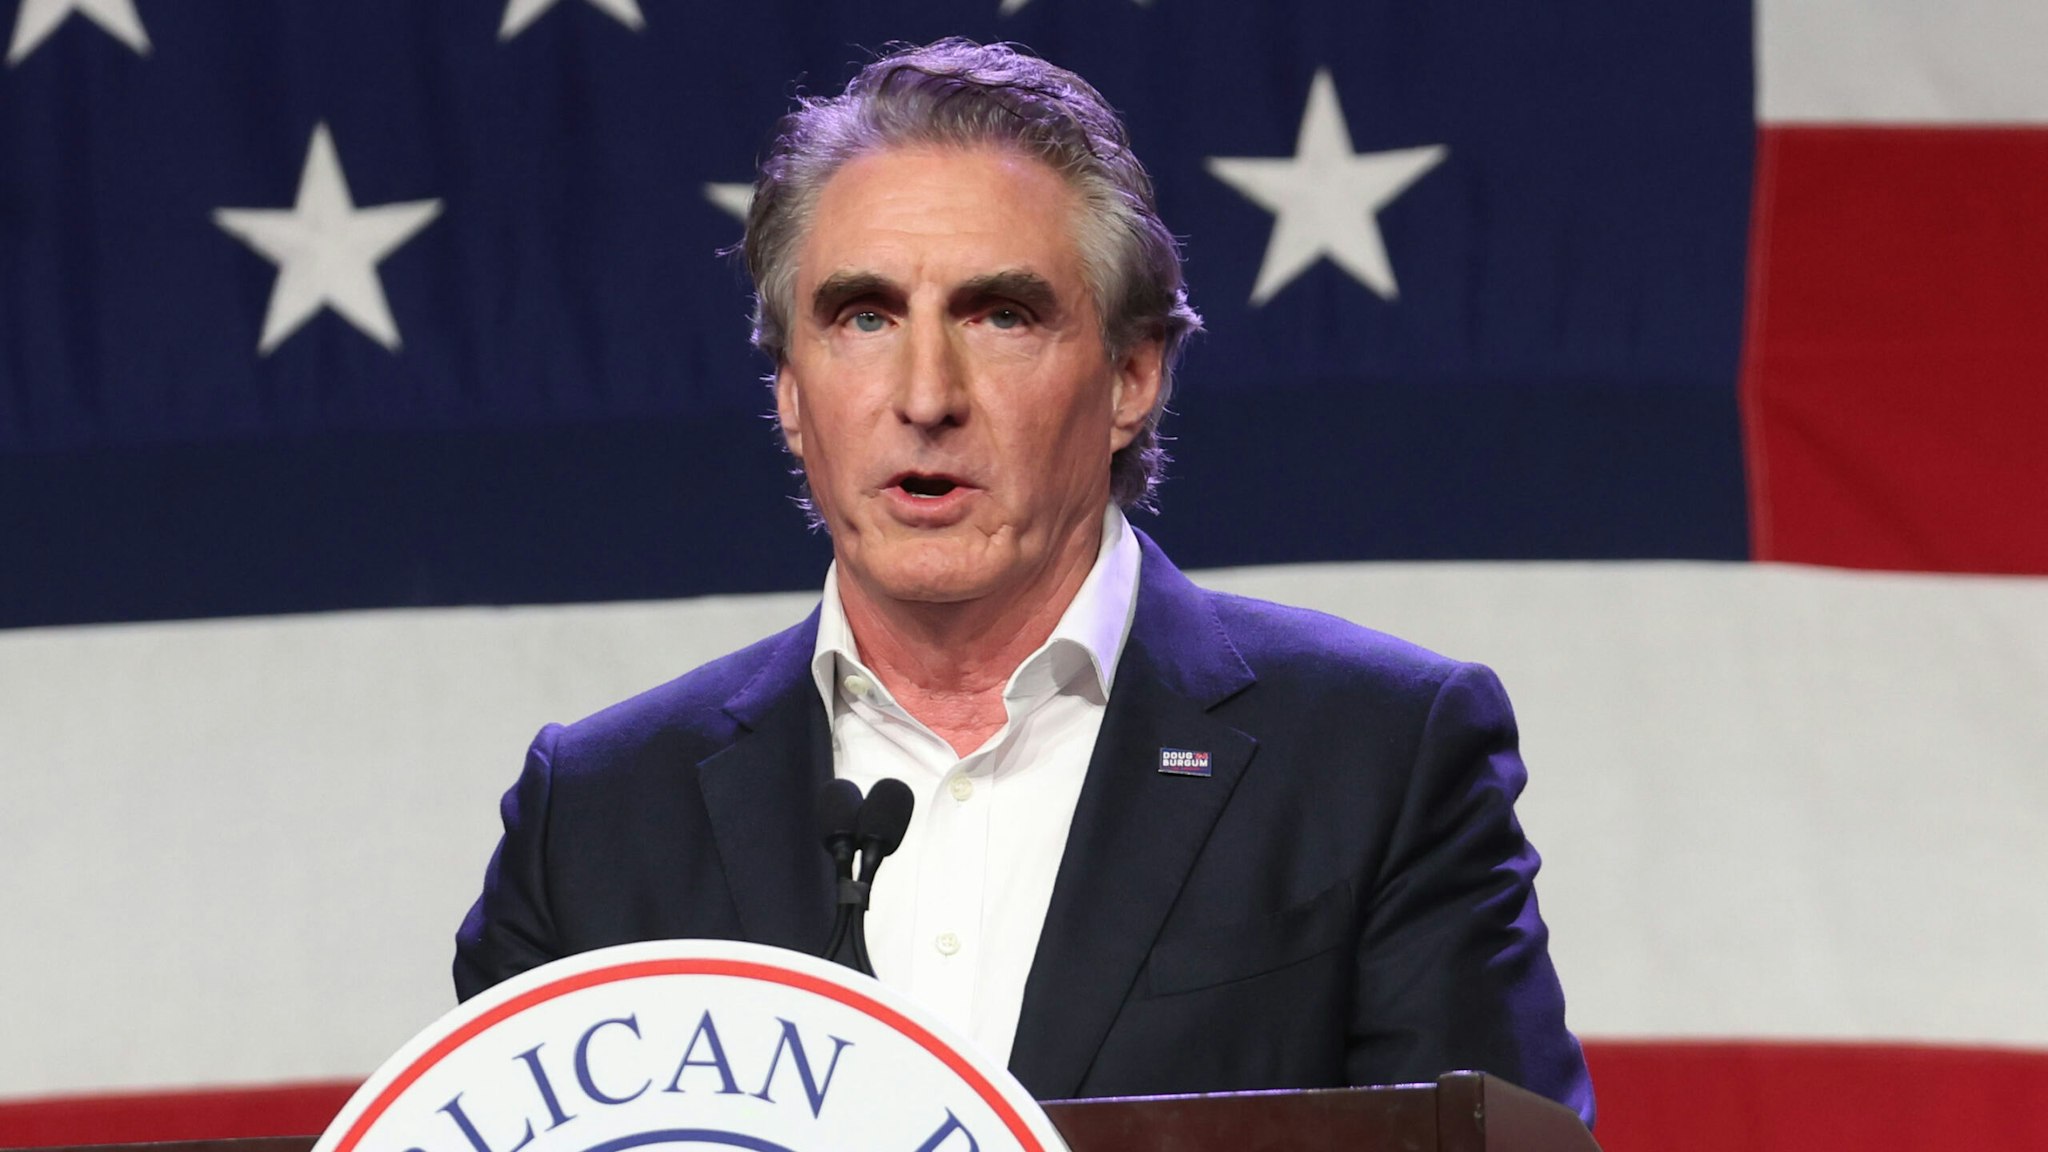 DES MOINES, IOWA - JULY 28: Republican presidential candidate North Dakota Governor Doug Burgum speaks to guests at the Republican Party of Iowa 2023 Lincoln Dinner on July 28, 2023 in Des Moines, Iowa. Thirteen Republican presidential candidates were scheduled to speak at the event.